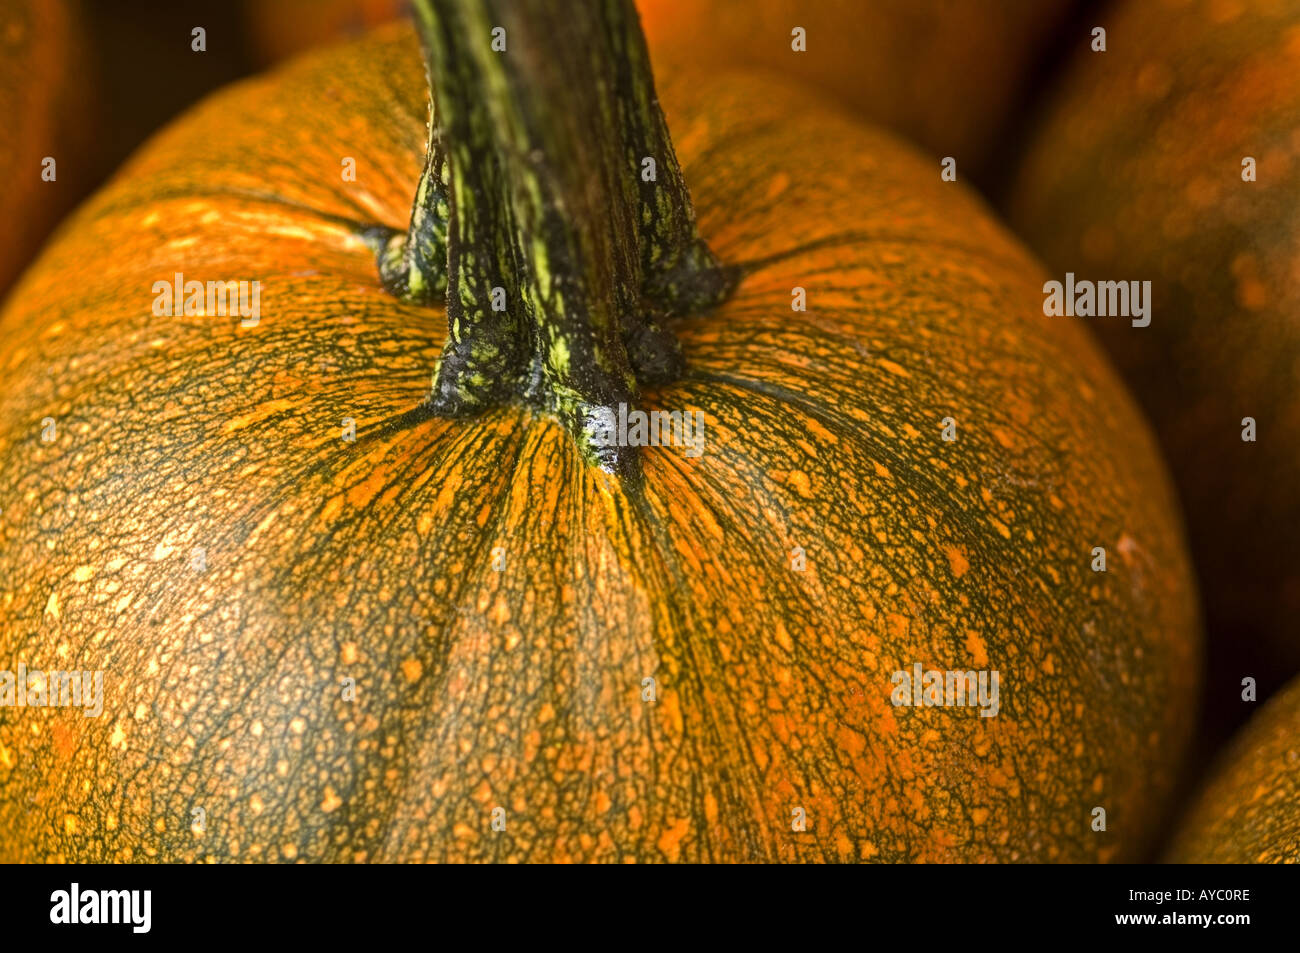 Pumpkins at farmers market in Connecticut Stock Photo